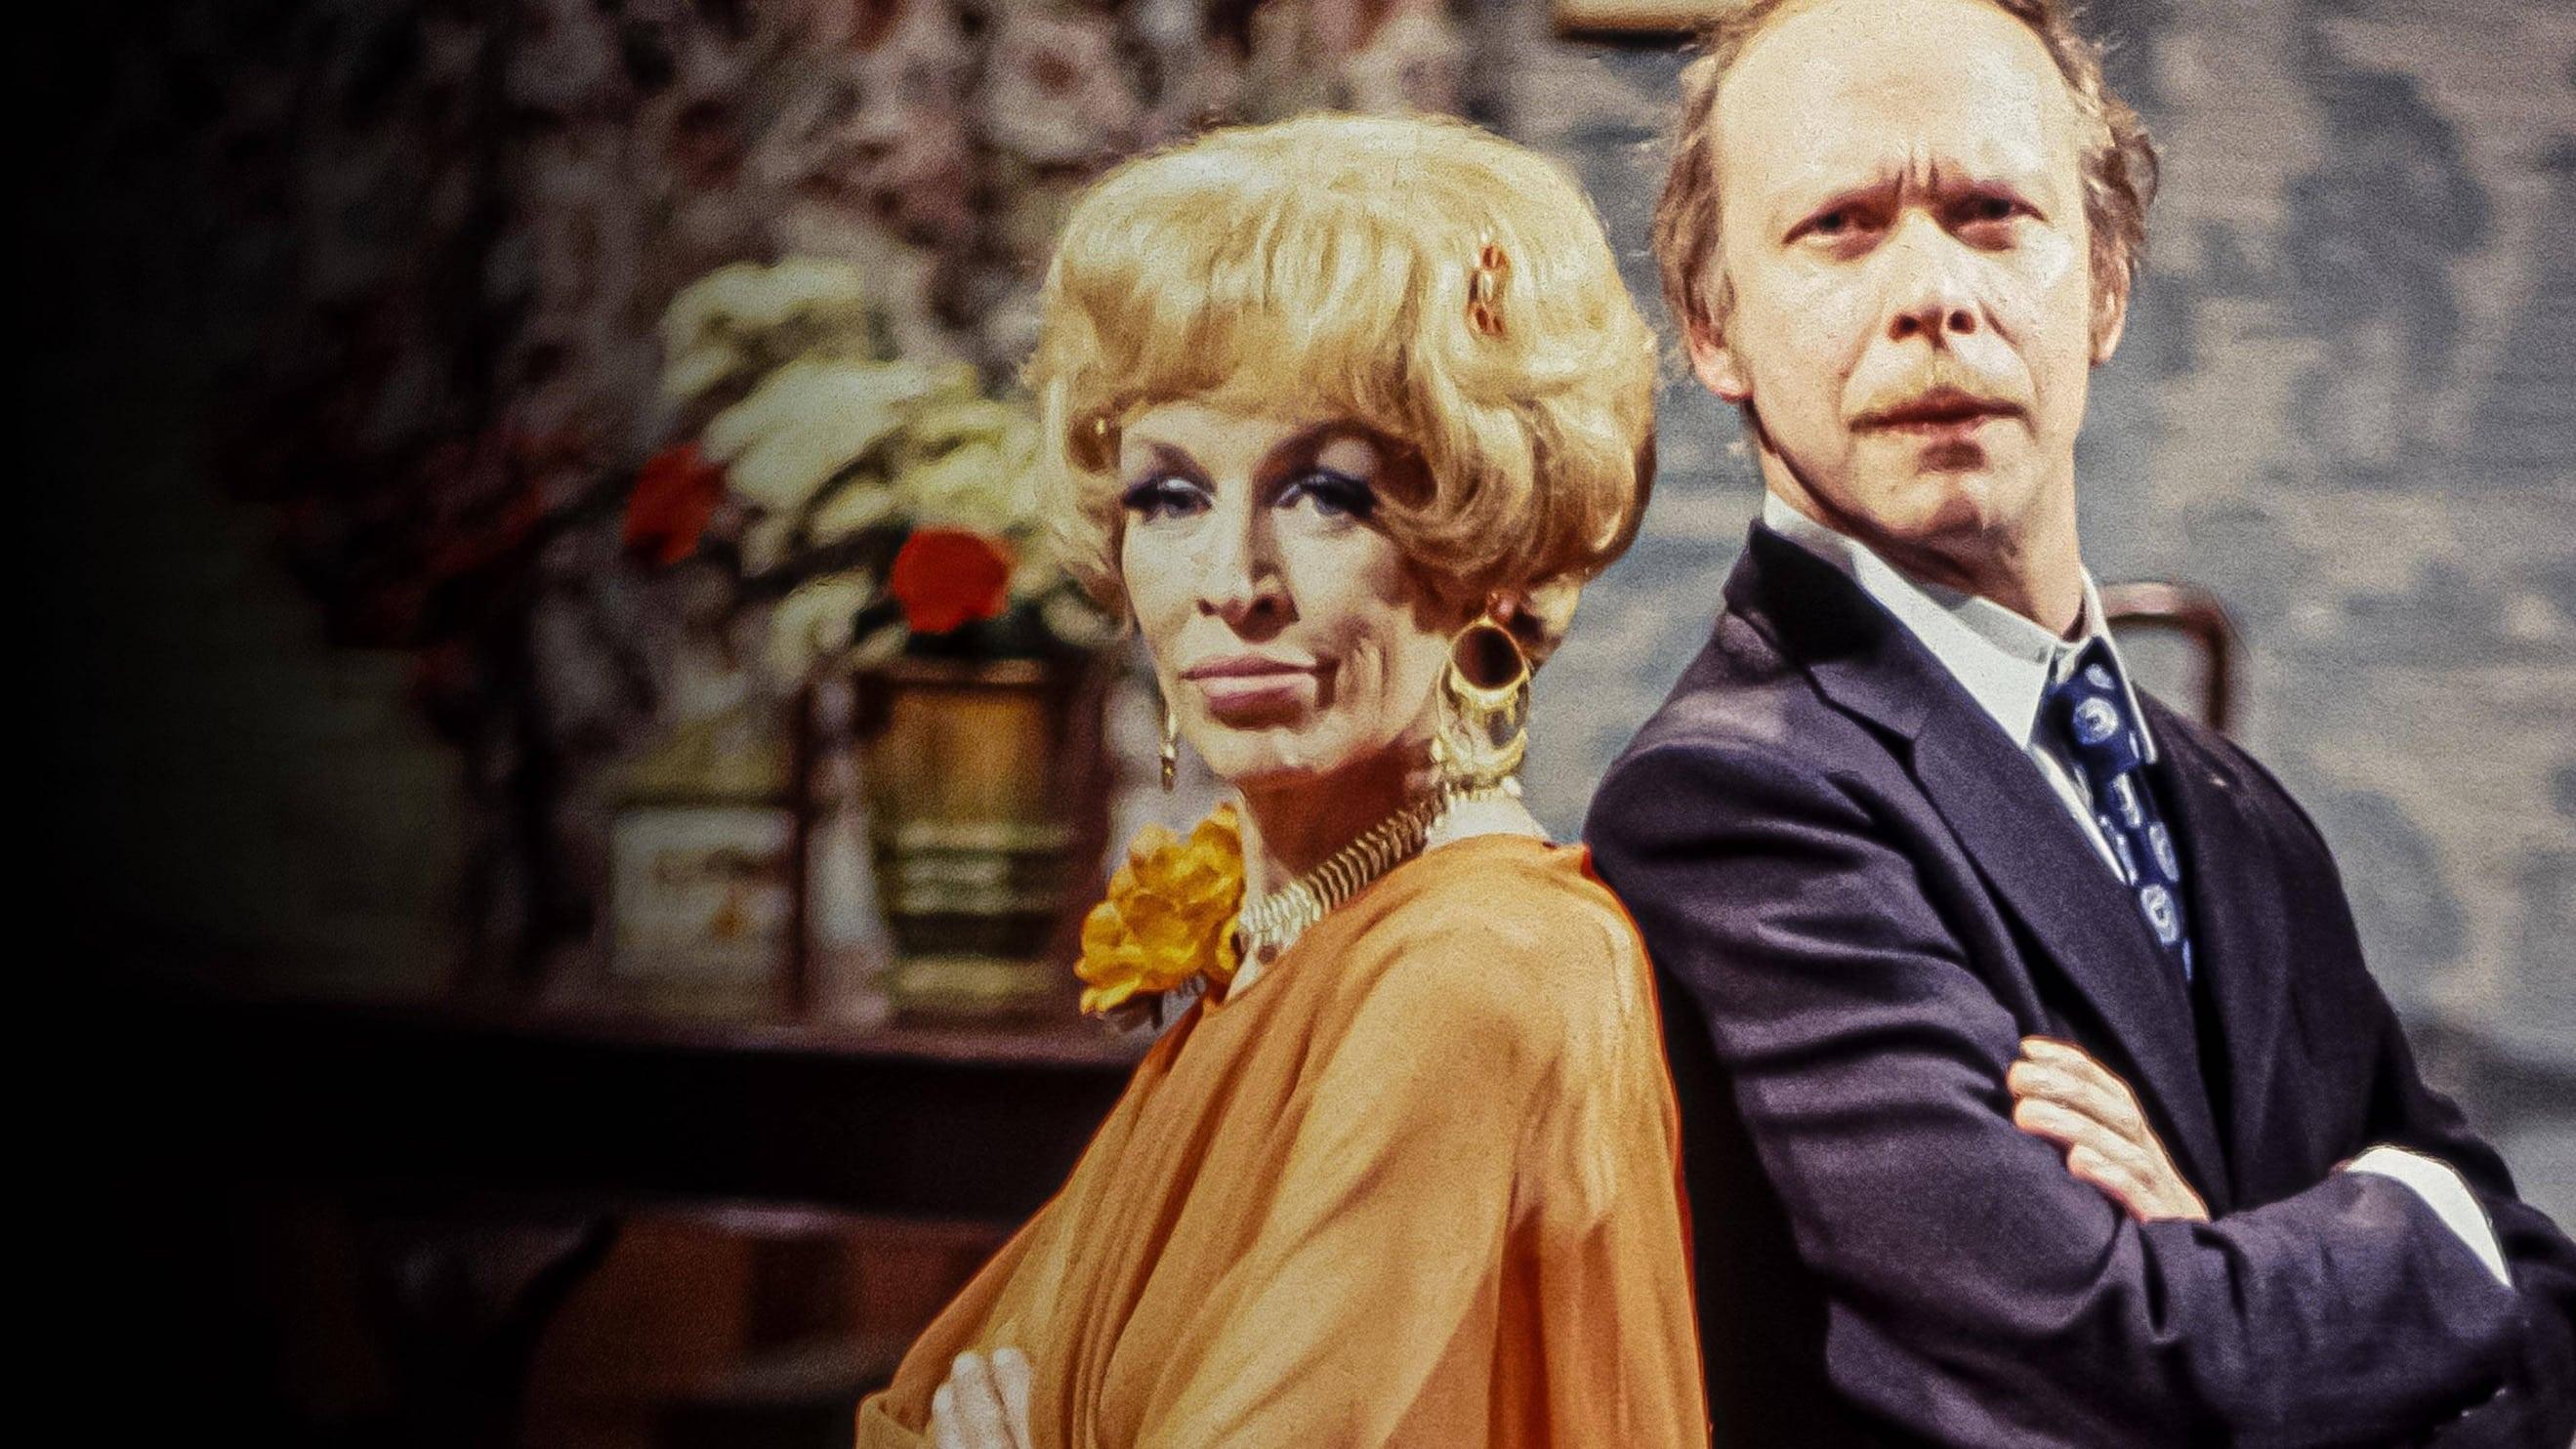 George and Mildred backdrop